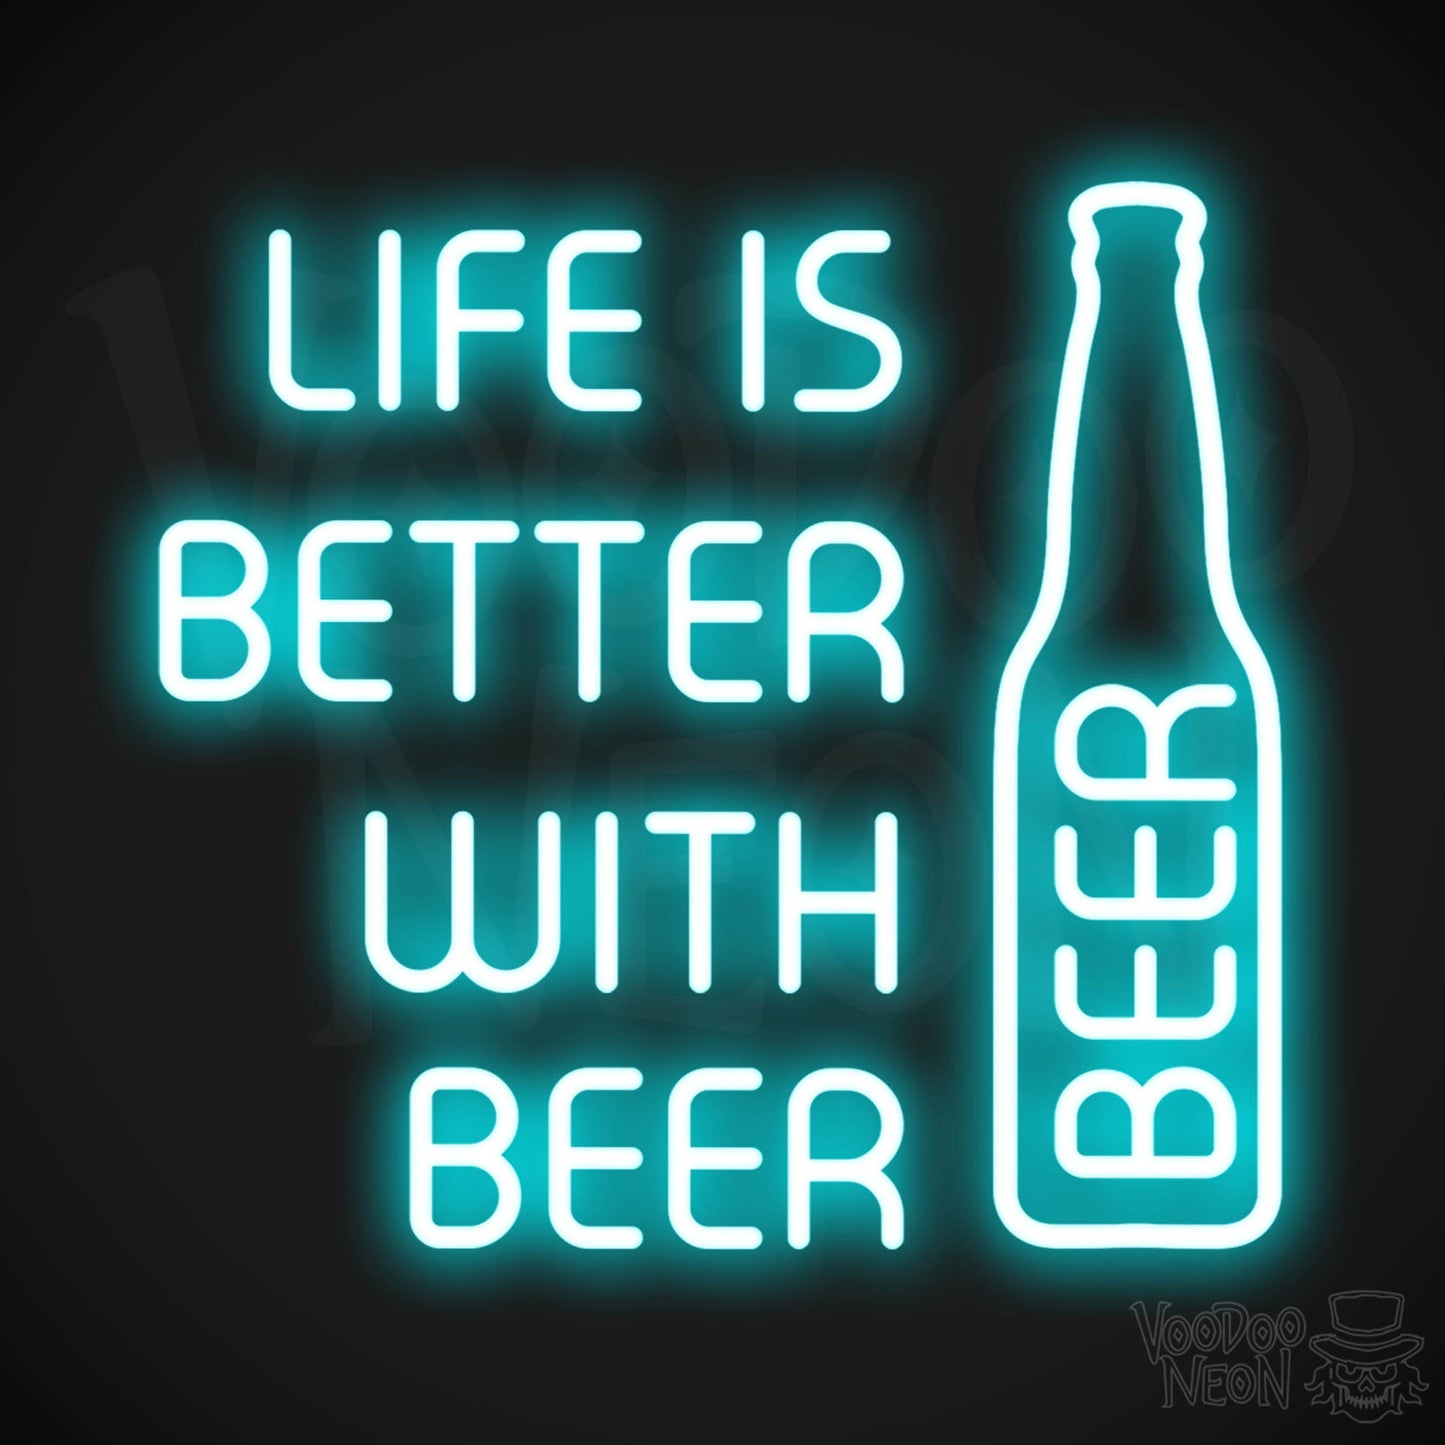 Life Is Better With Beer LED Neon - Ice Blue